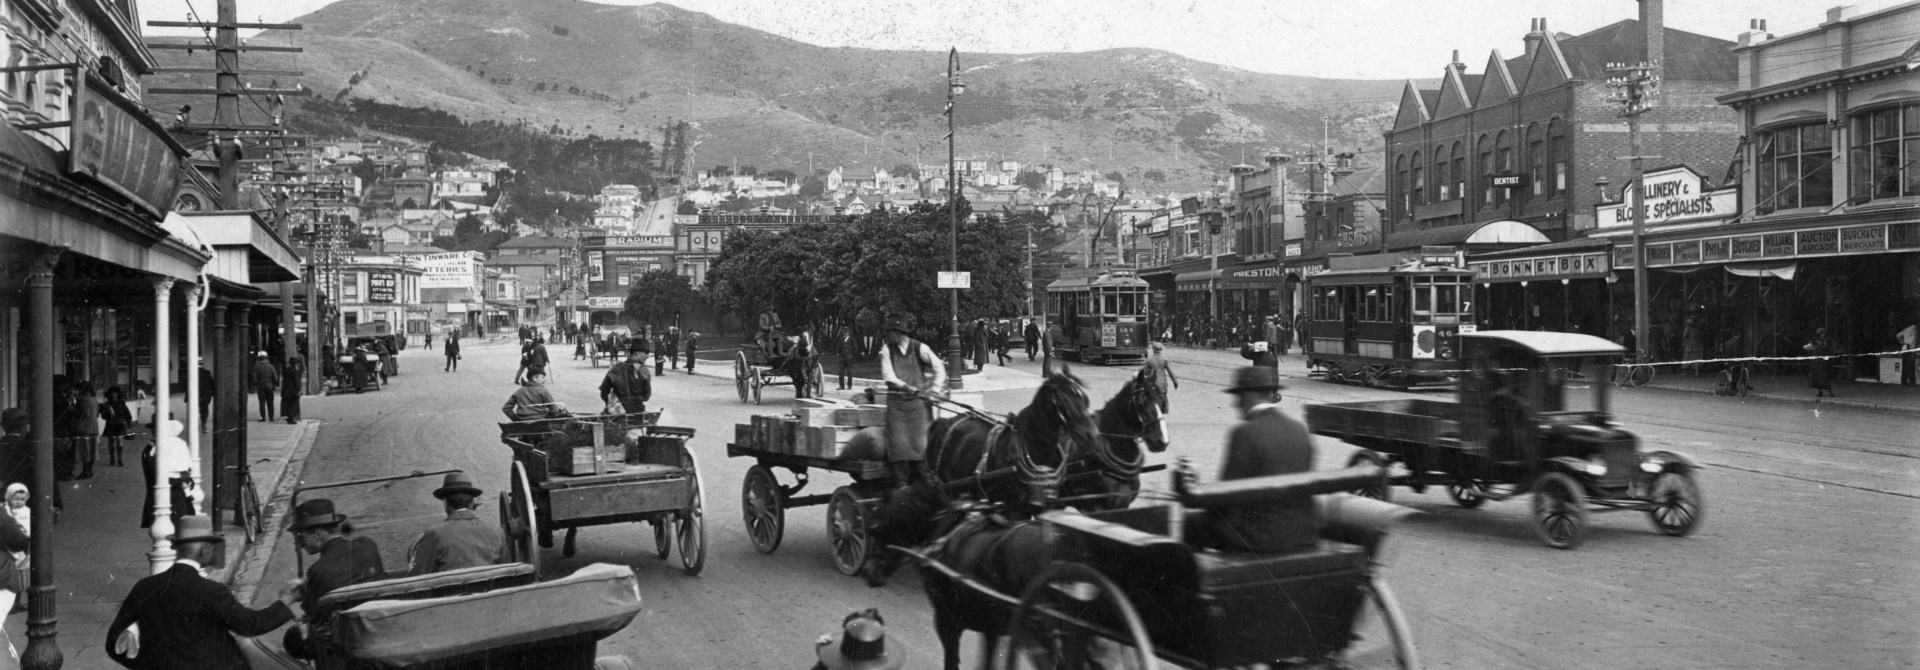 A black and white photo of Courtenay Place in 1910 with horse and carts riding beside early motorcars.